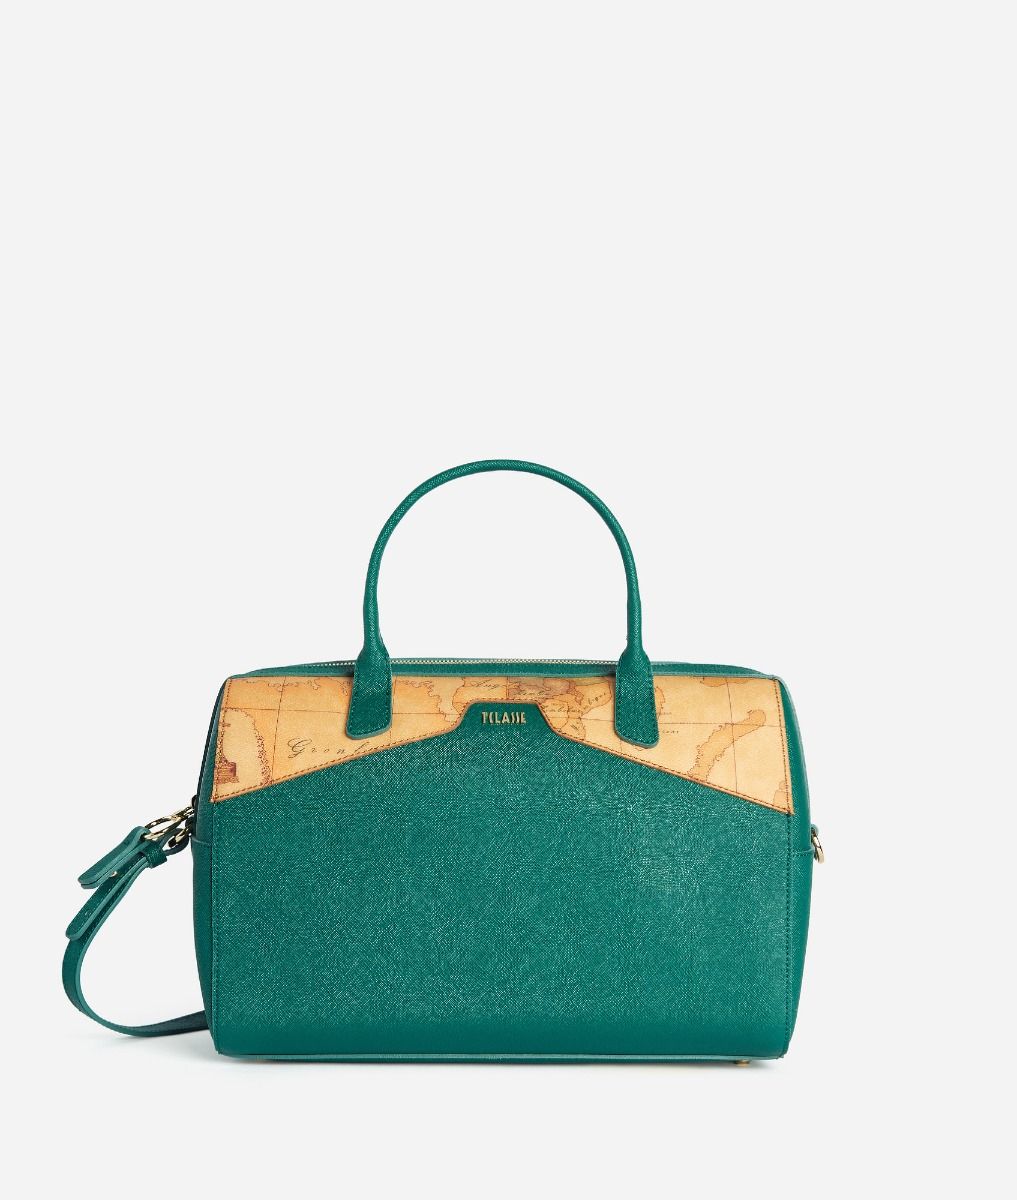 Glam City bowler bag with crossbody strap Emerald Green,front